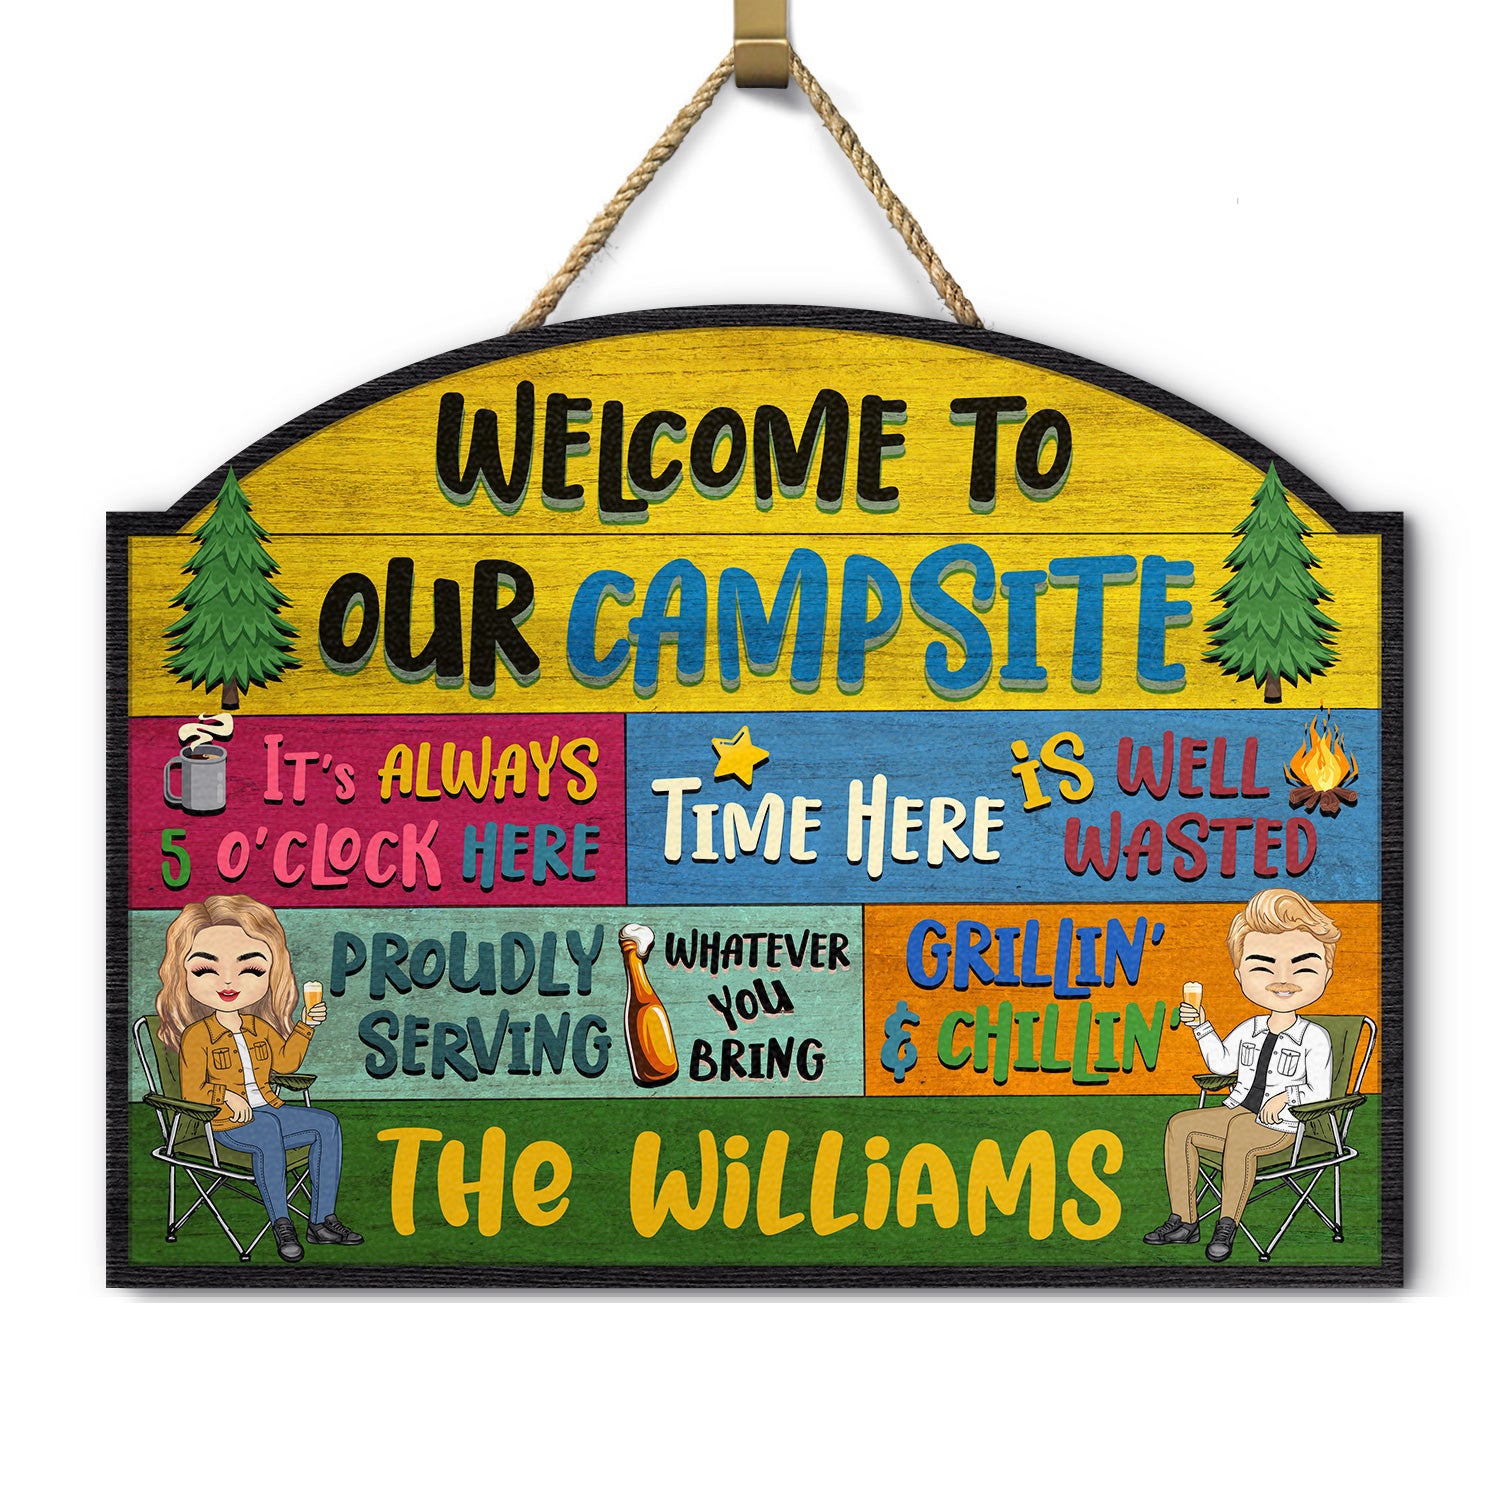 Welcome Grilling Chilling - Camping Decor For Couple - Personalized Custom Shaped Wood Sign